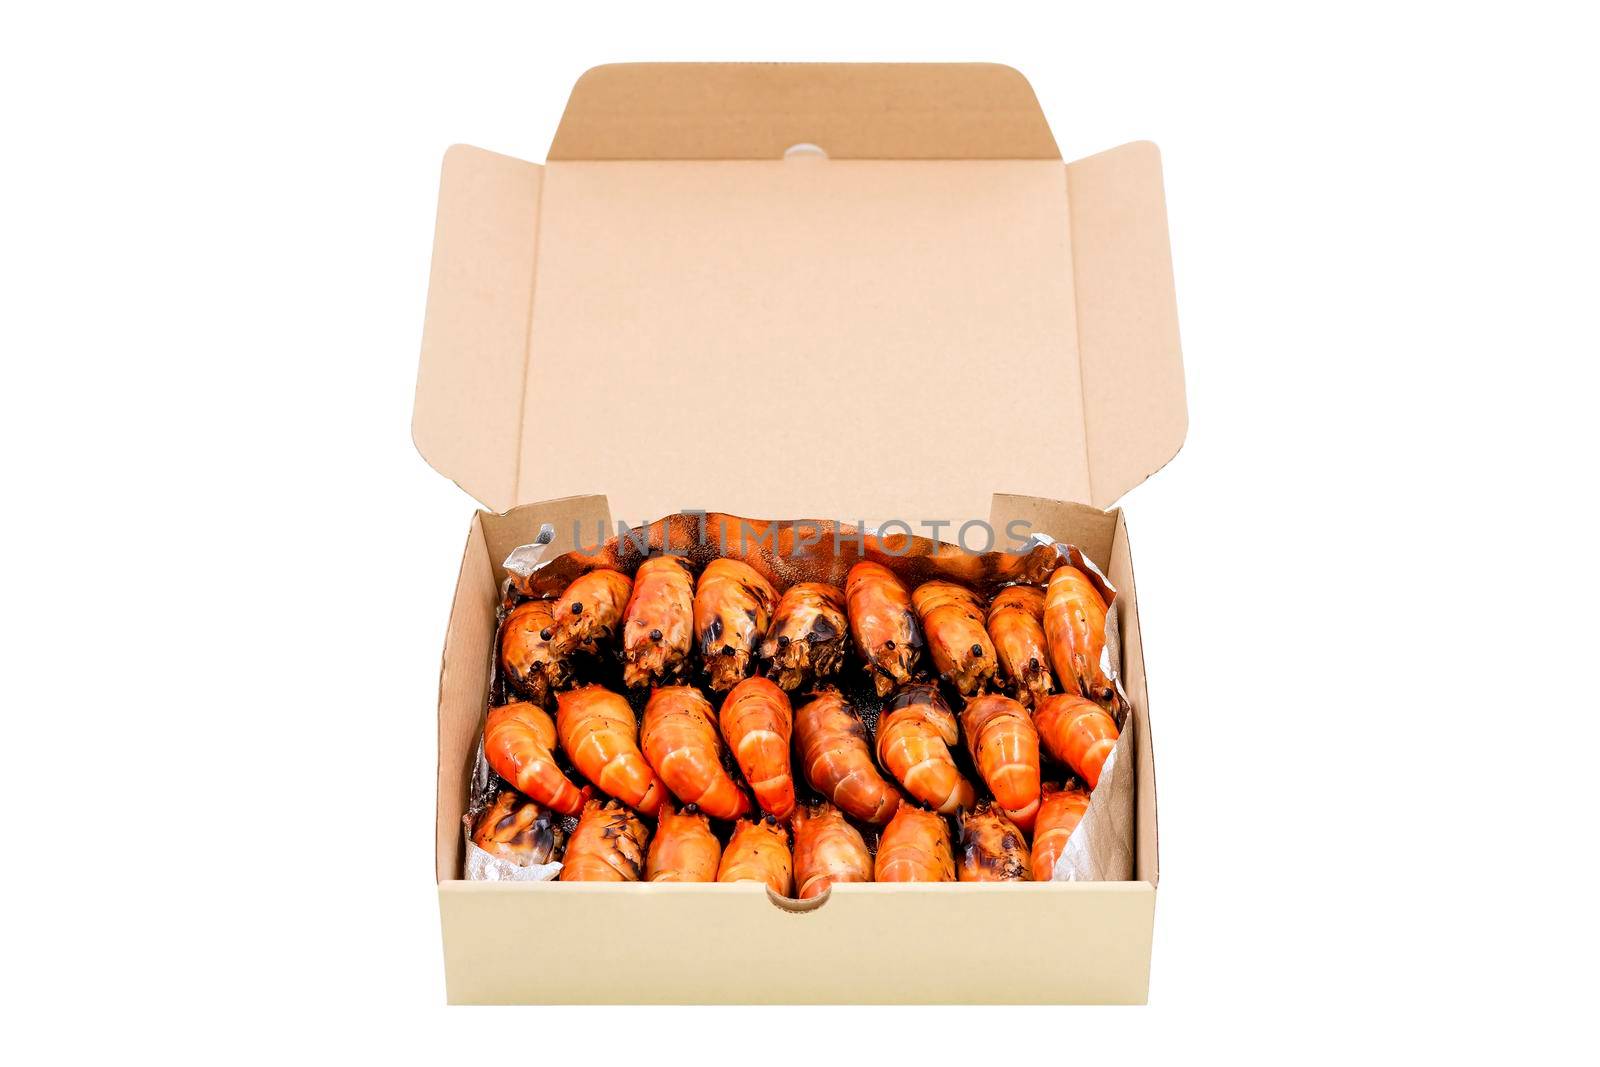 Group of grilled river prawns arrange in a paper box isolated on white background.